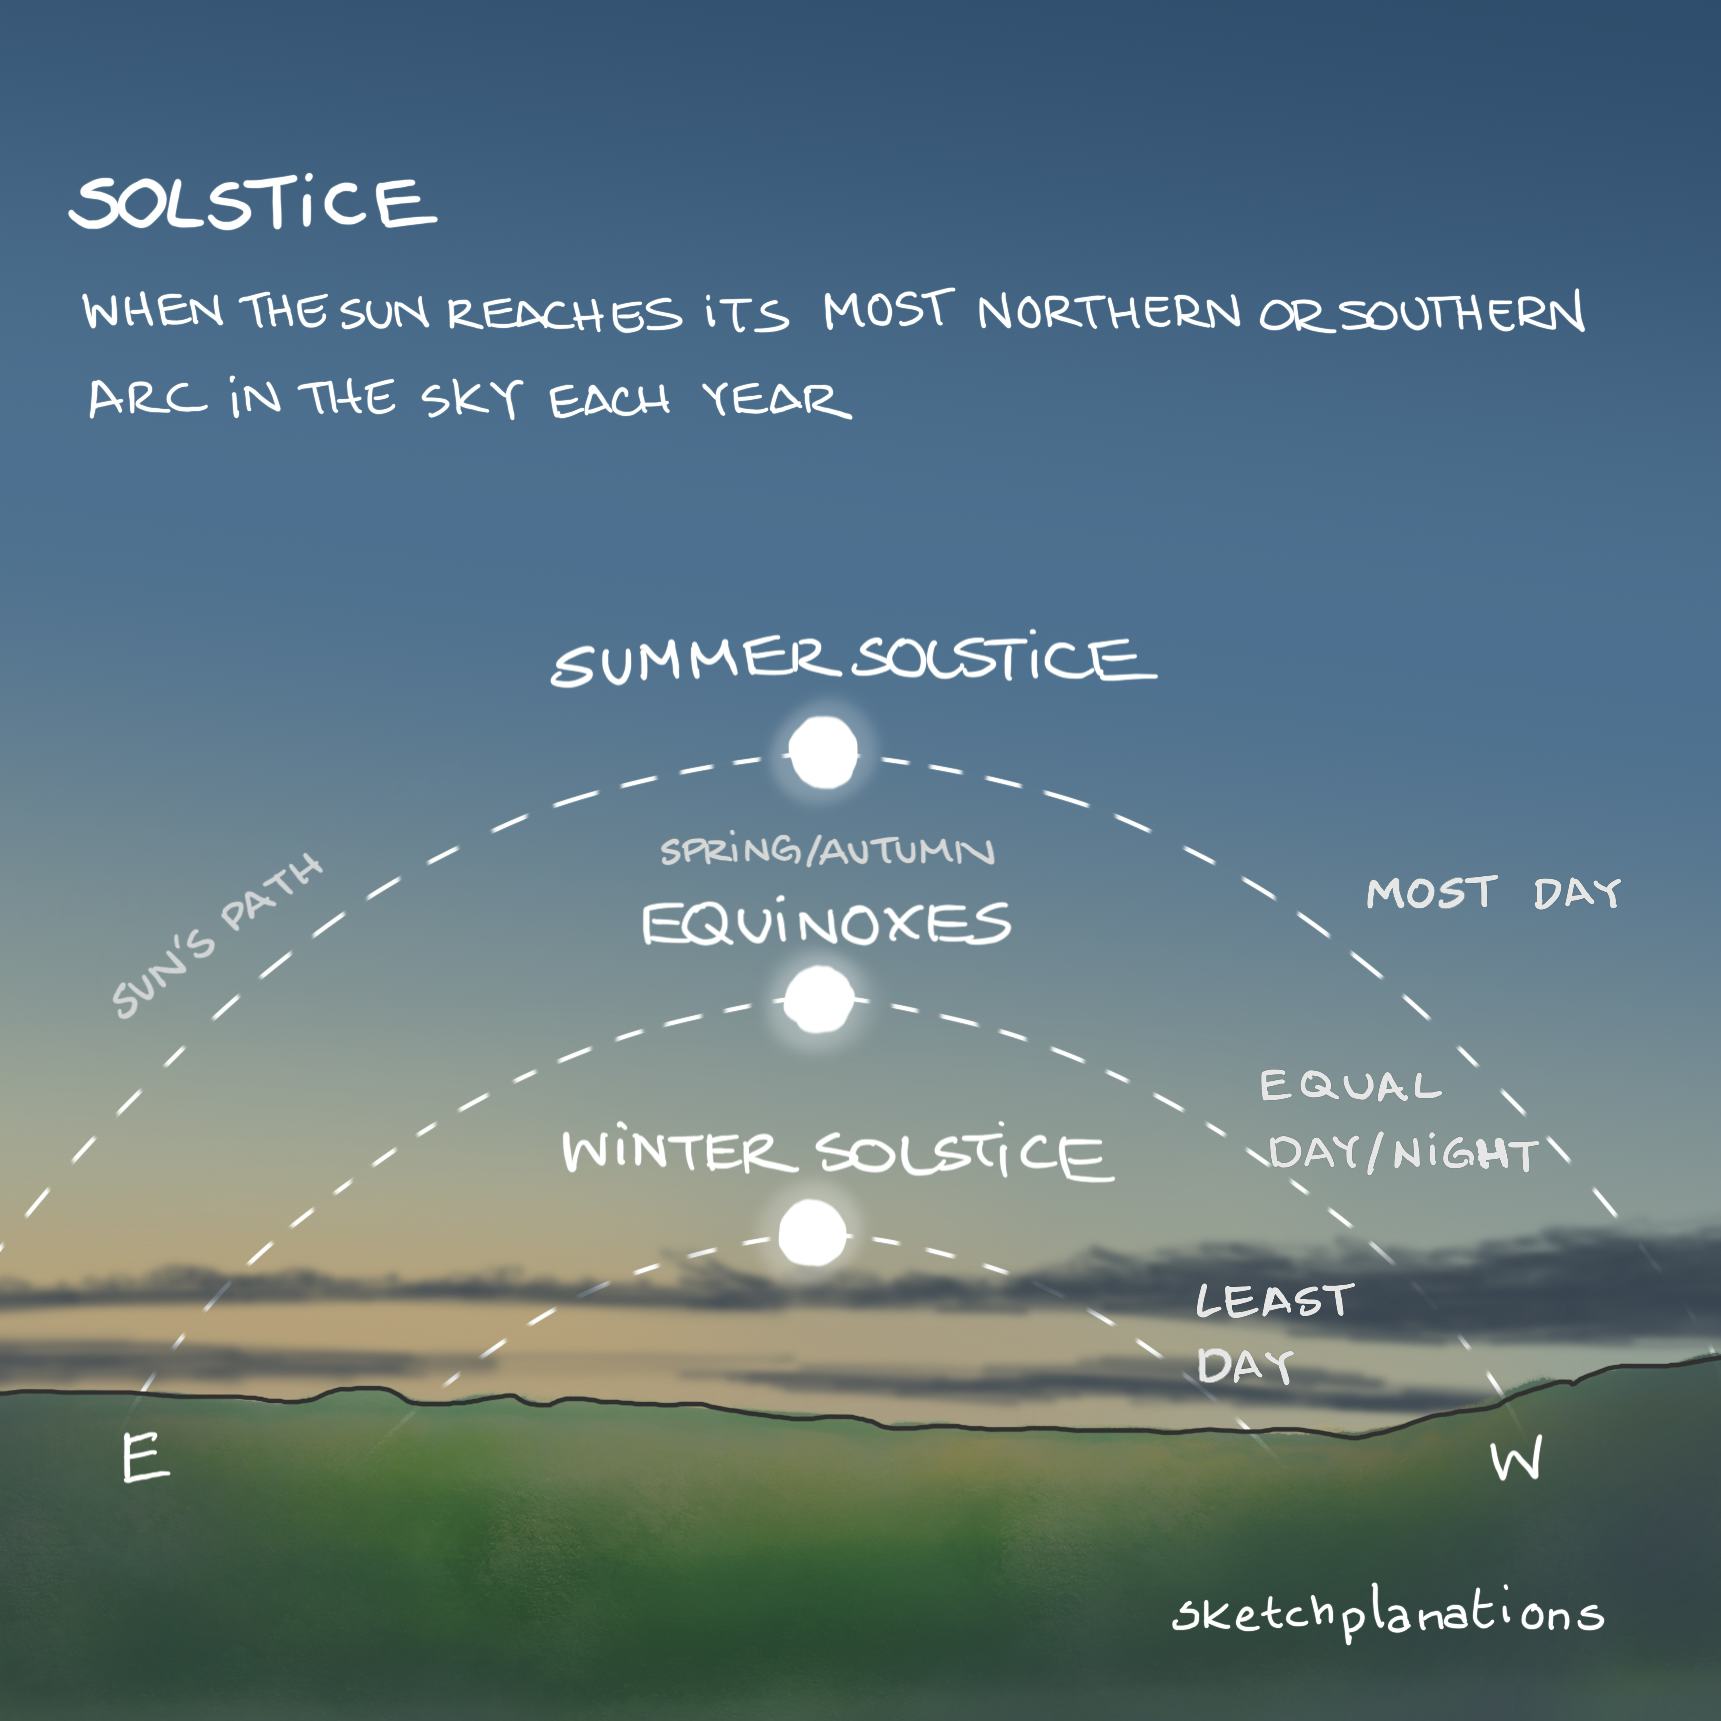 Solstice: illustration showing the paths of the sun in winter, summer and on the equinoxes